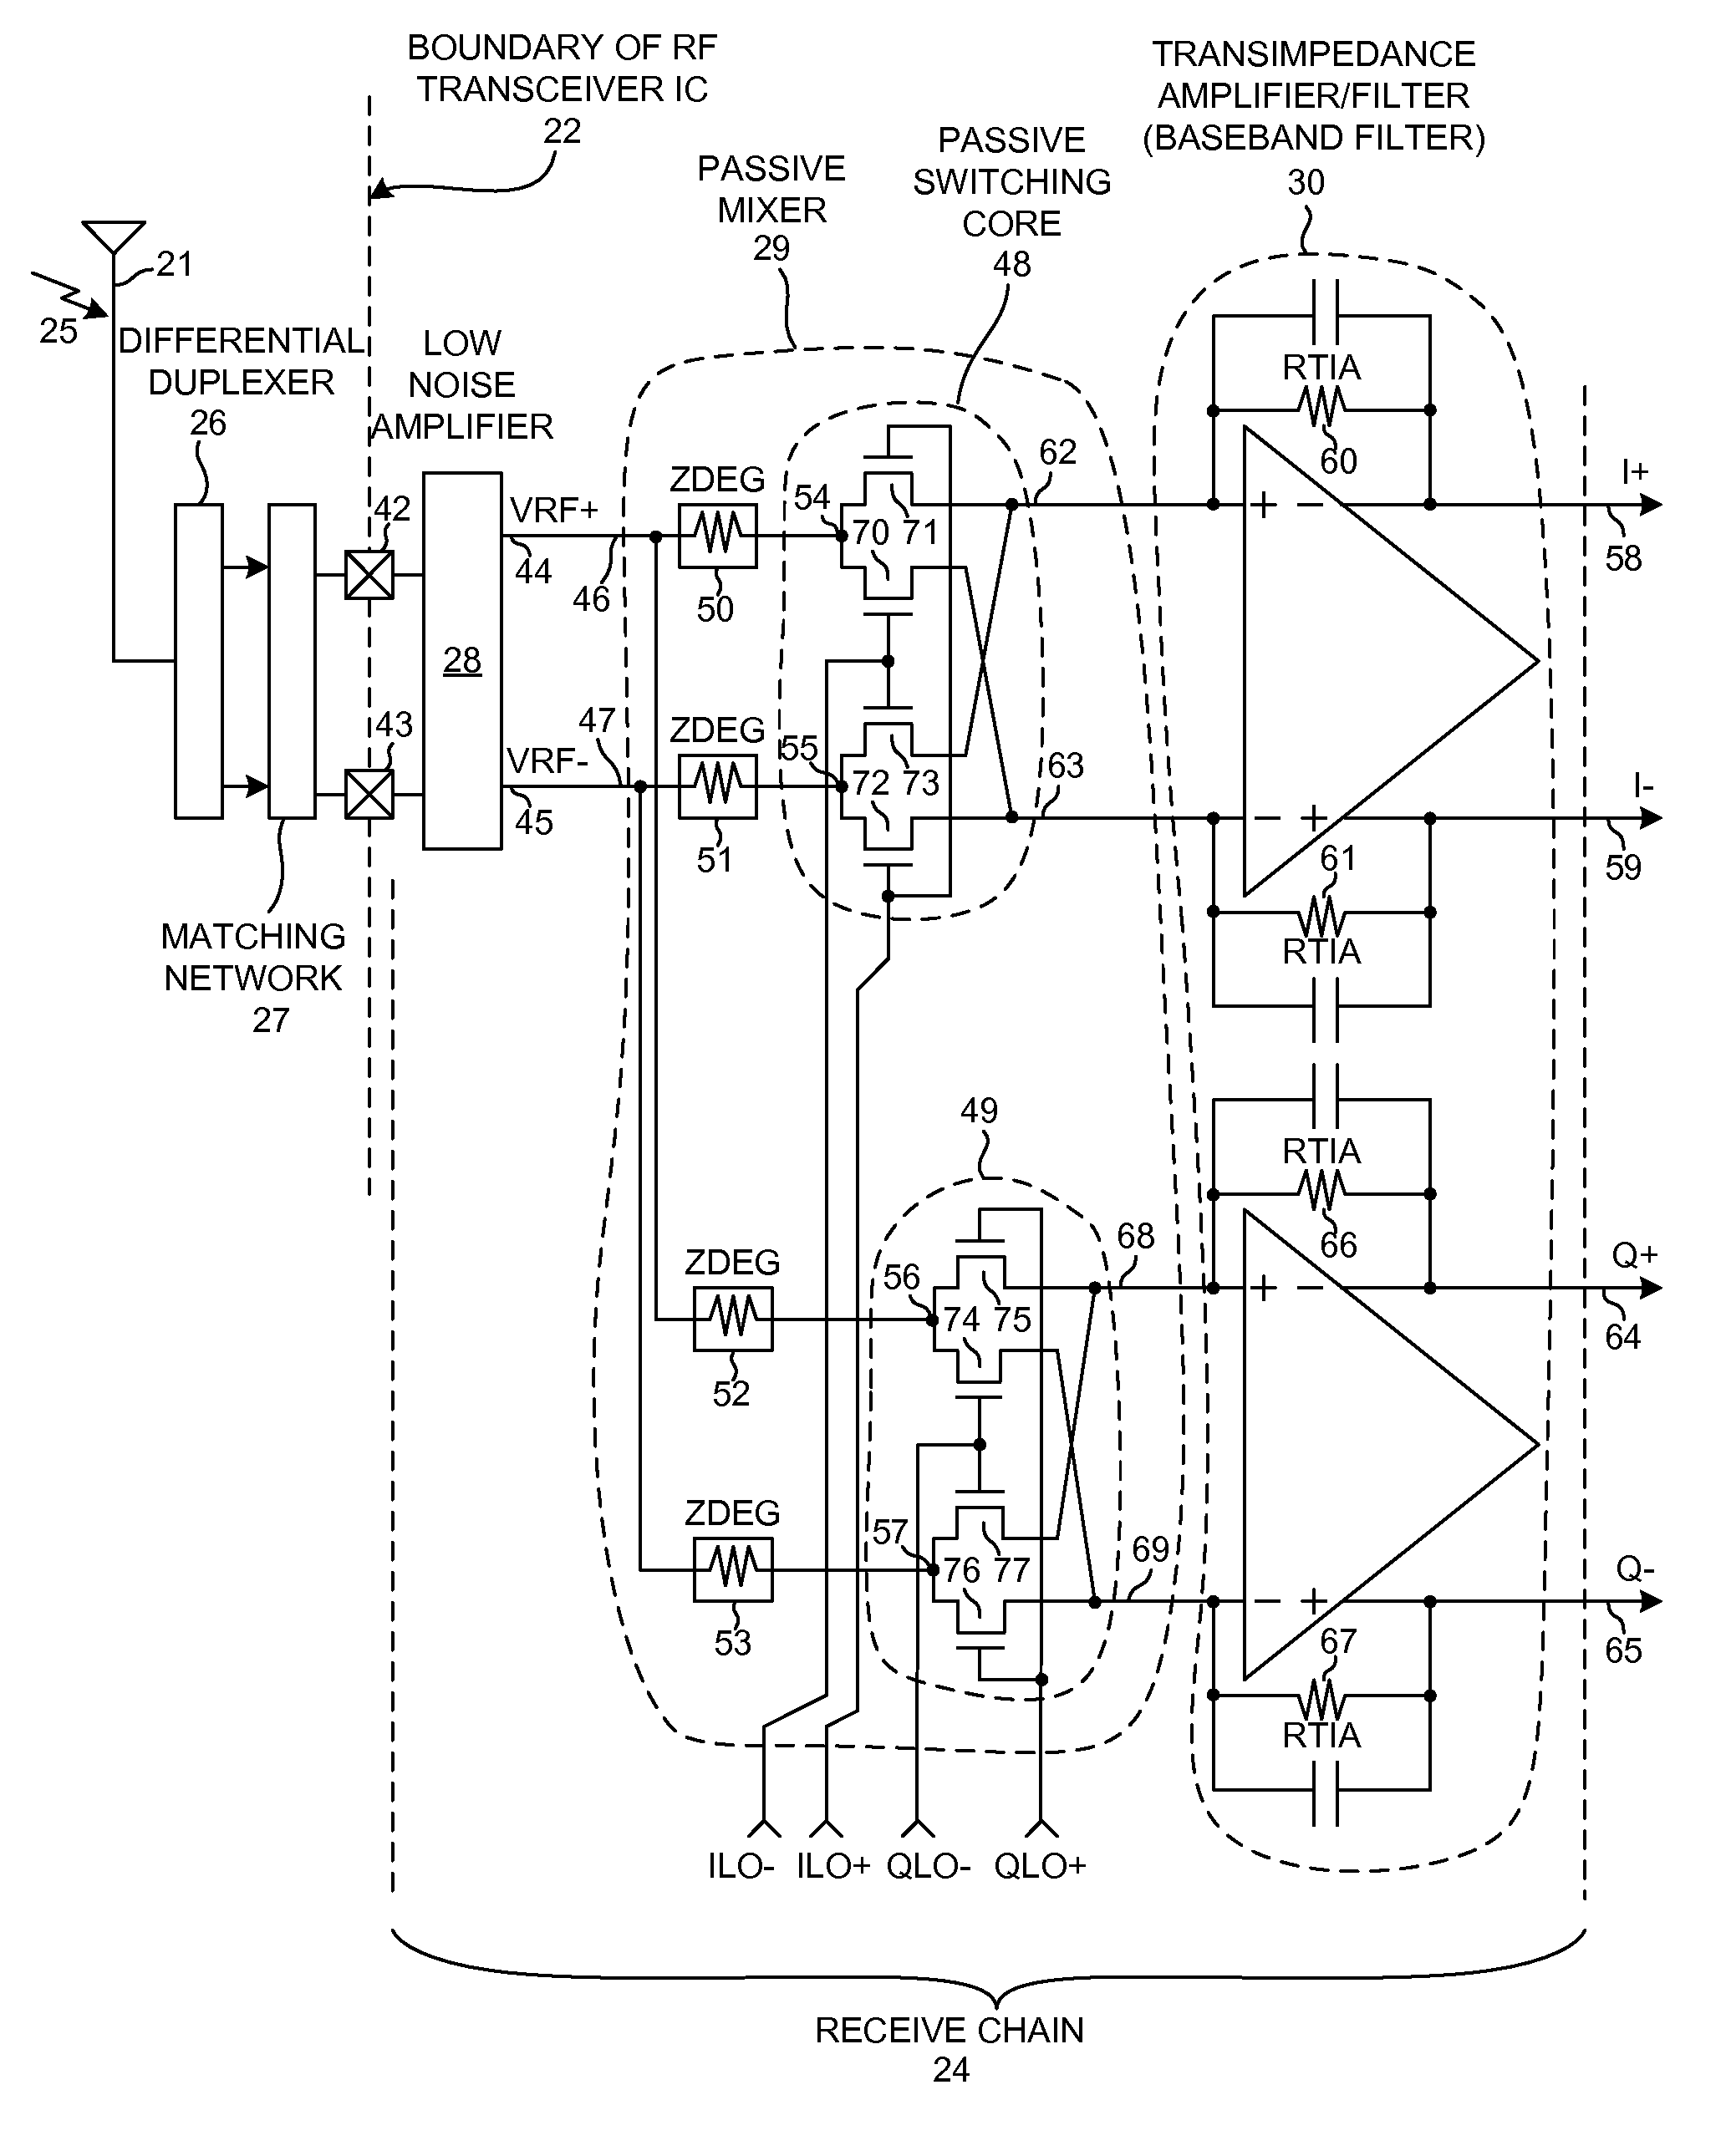 Degenerated passive mixer in saw-less receiver